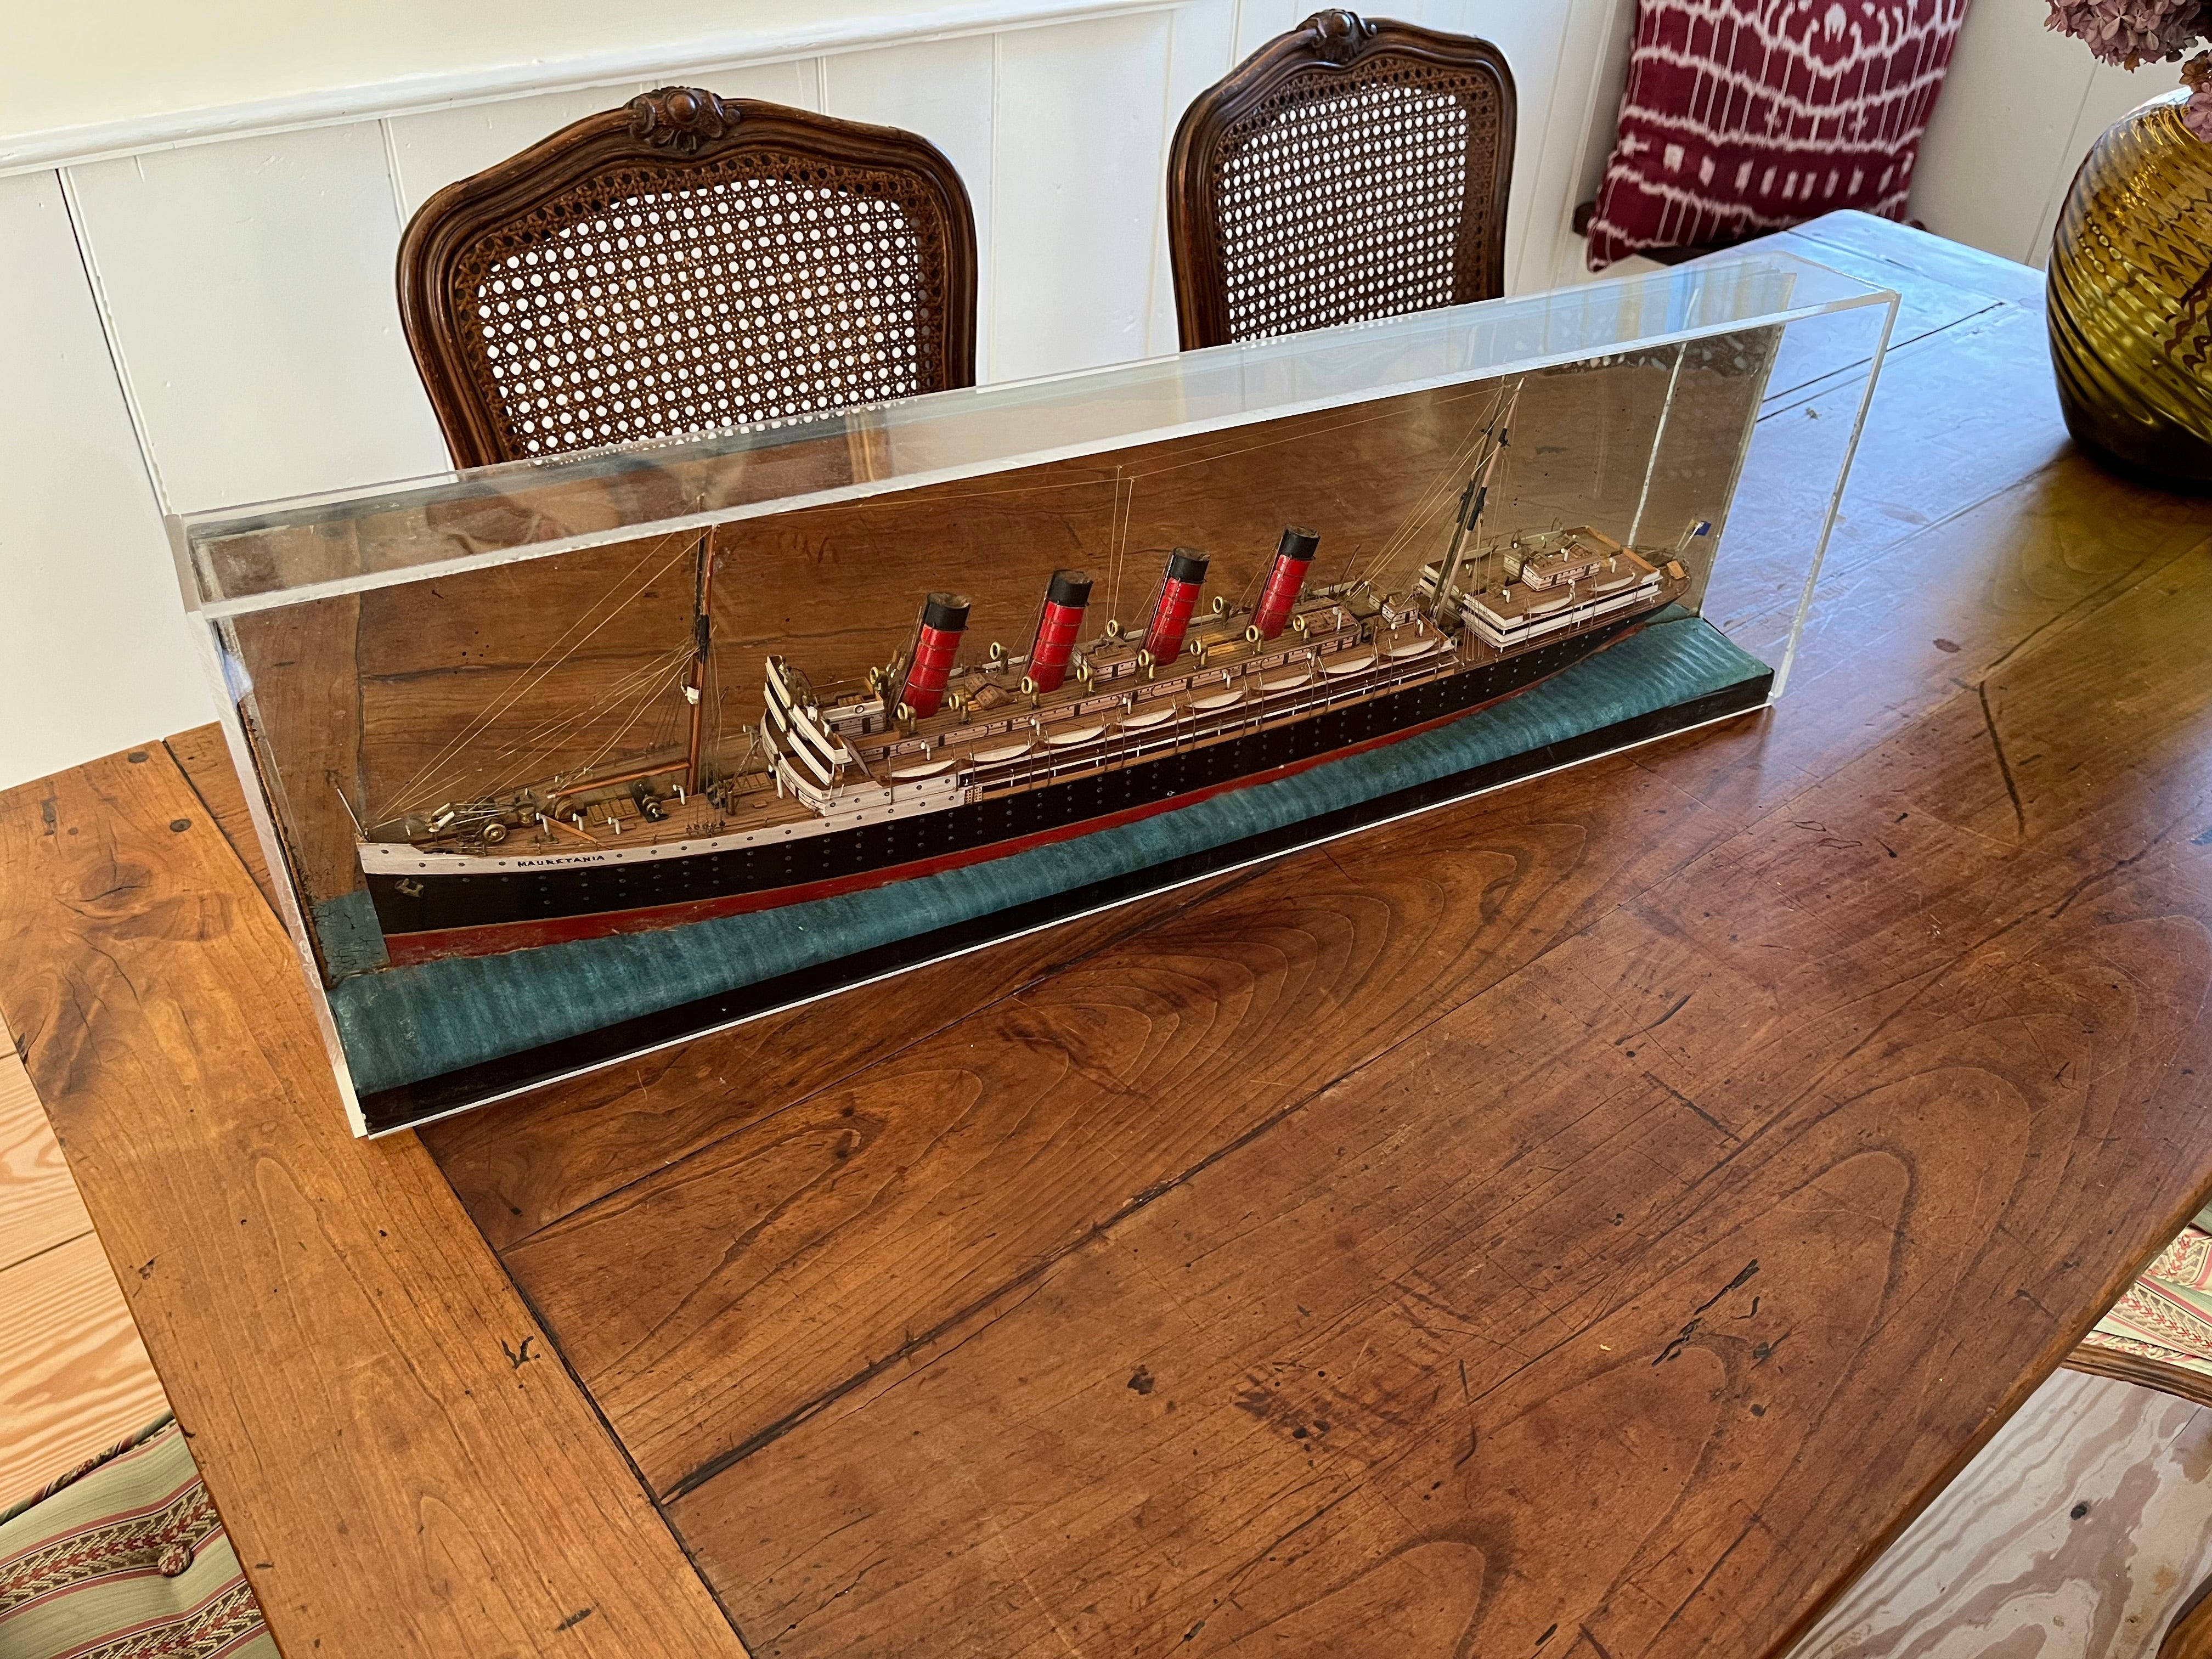 A fine half-hull model of RMS Mauretania, sister ship of the ill-fated Lusitania. Hand made in wood with metal fittings, the model is cleverly mounted on a period mirror giving the illusion of a full hull model without taking up additional space.